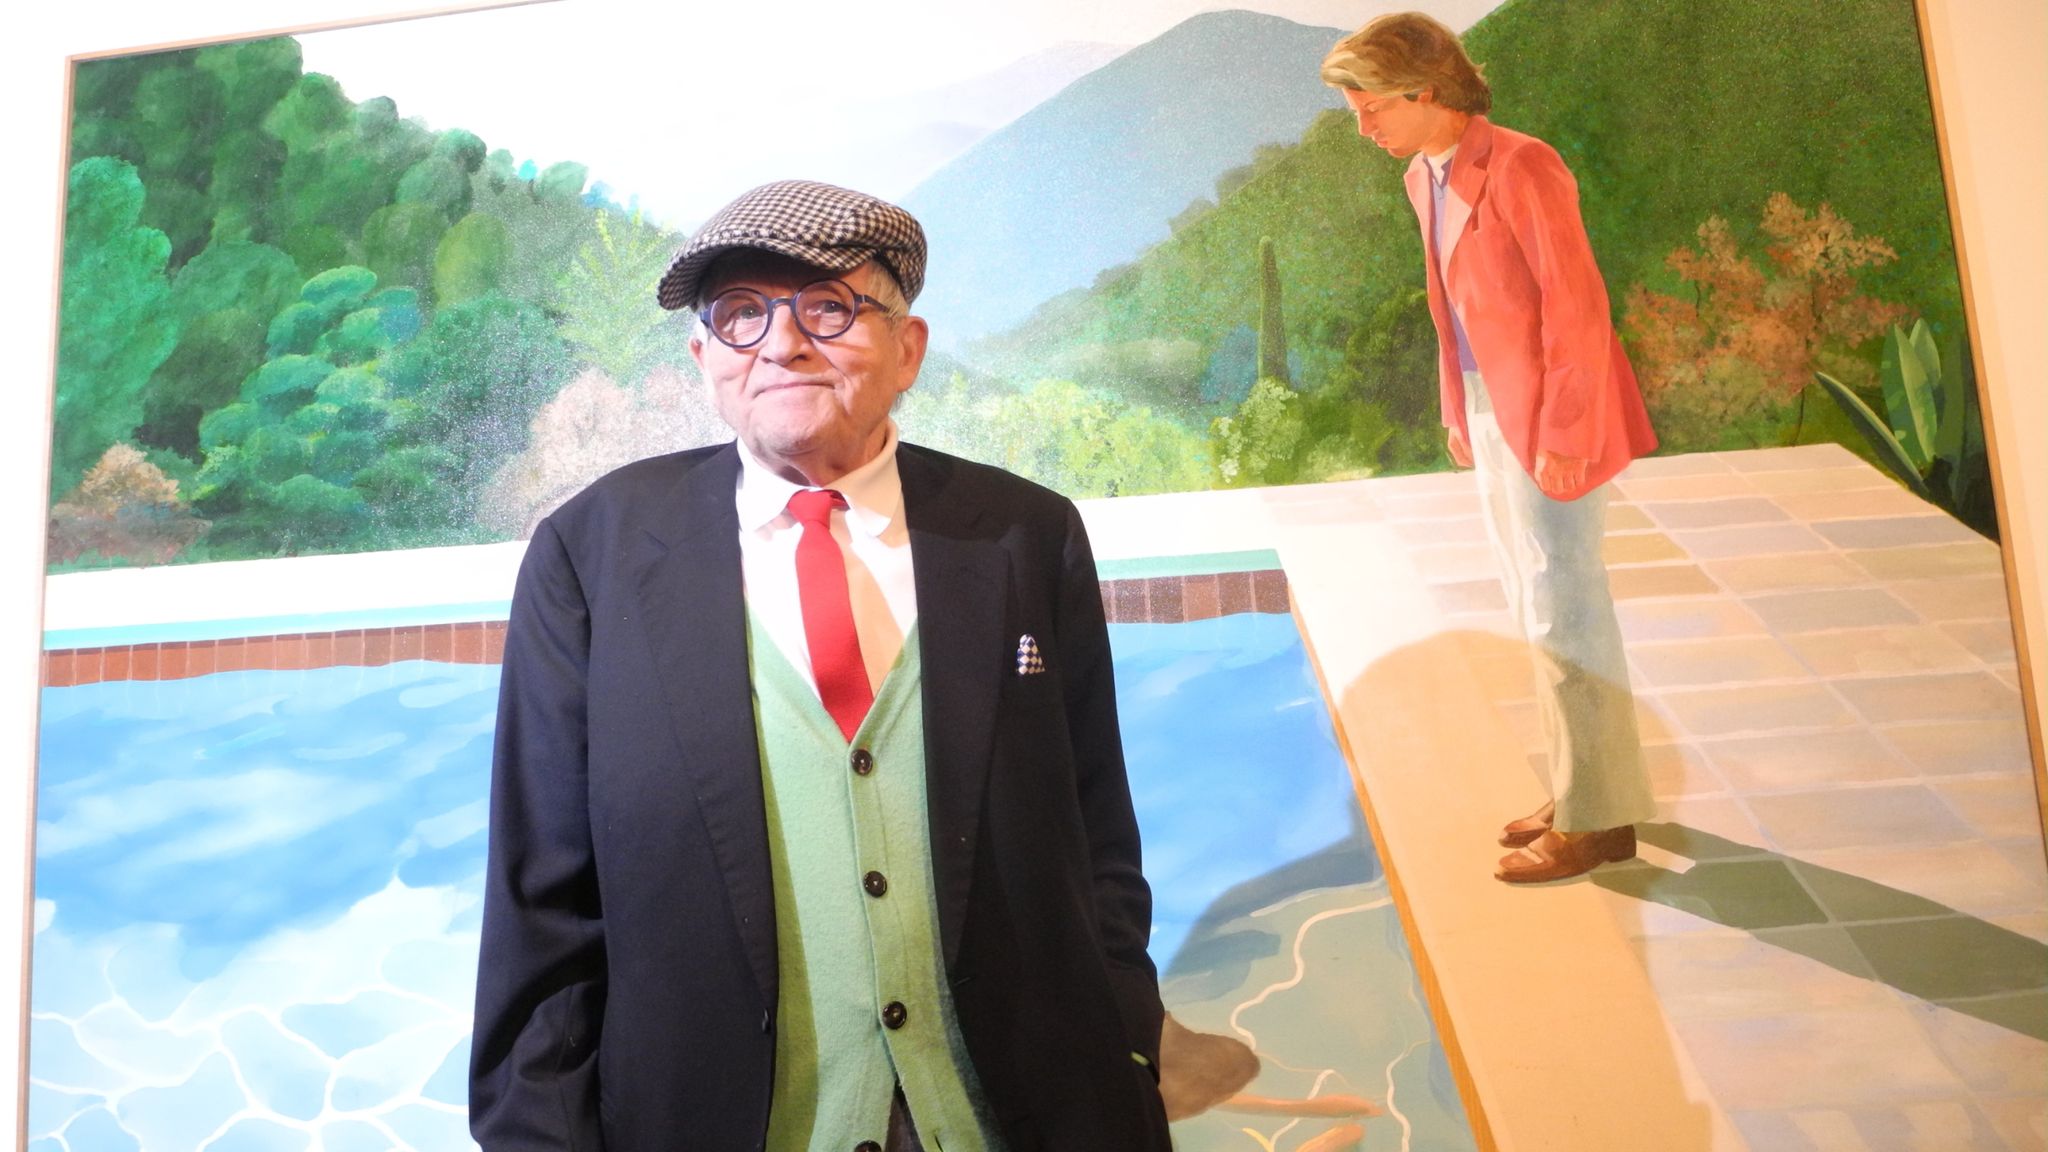 David Hockney standing in front of his "Portrait of an Artist (Pool with Two Figures)"&#39;painting at the Metropolitan Museum of Art in New York, USA, 20 November 2017. The Museum is dedicating a large retrospective to the work of Hockney, which spans almost 60 years. Photo by: Johannes Schmitt-Tegge/picture-alliance/dpa/AP Images